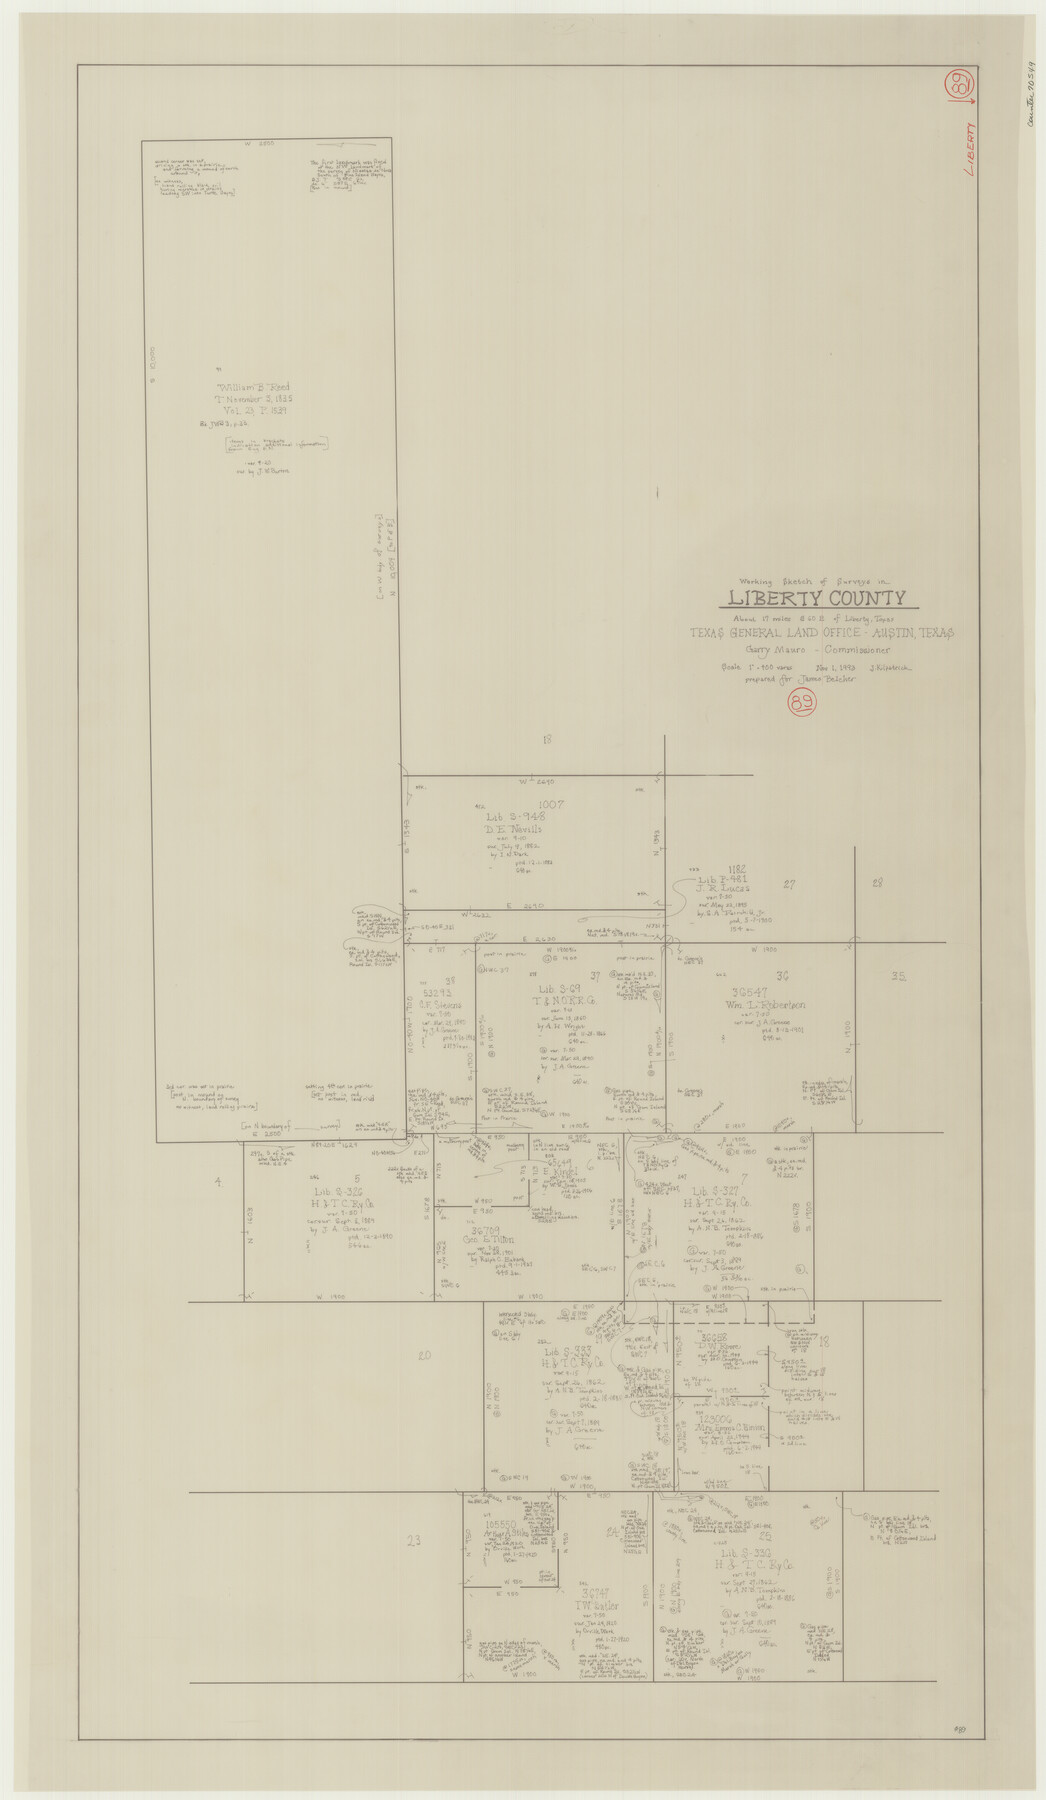 70549, Liberty County Working Sketch 89, General Map Collection